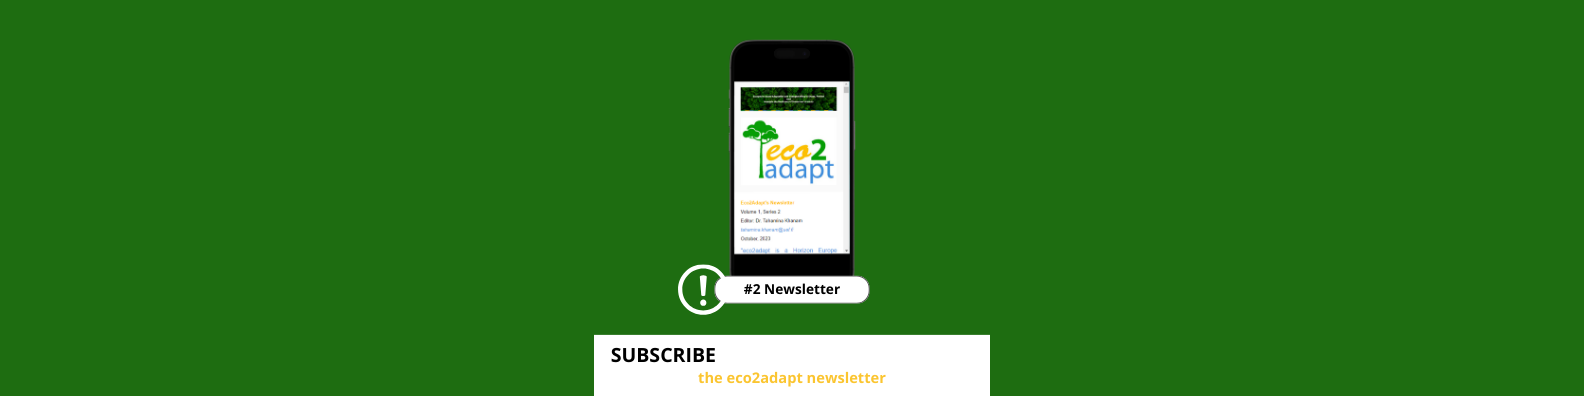 The second Newsletter of eco2adapt is available